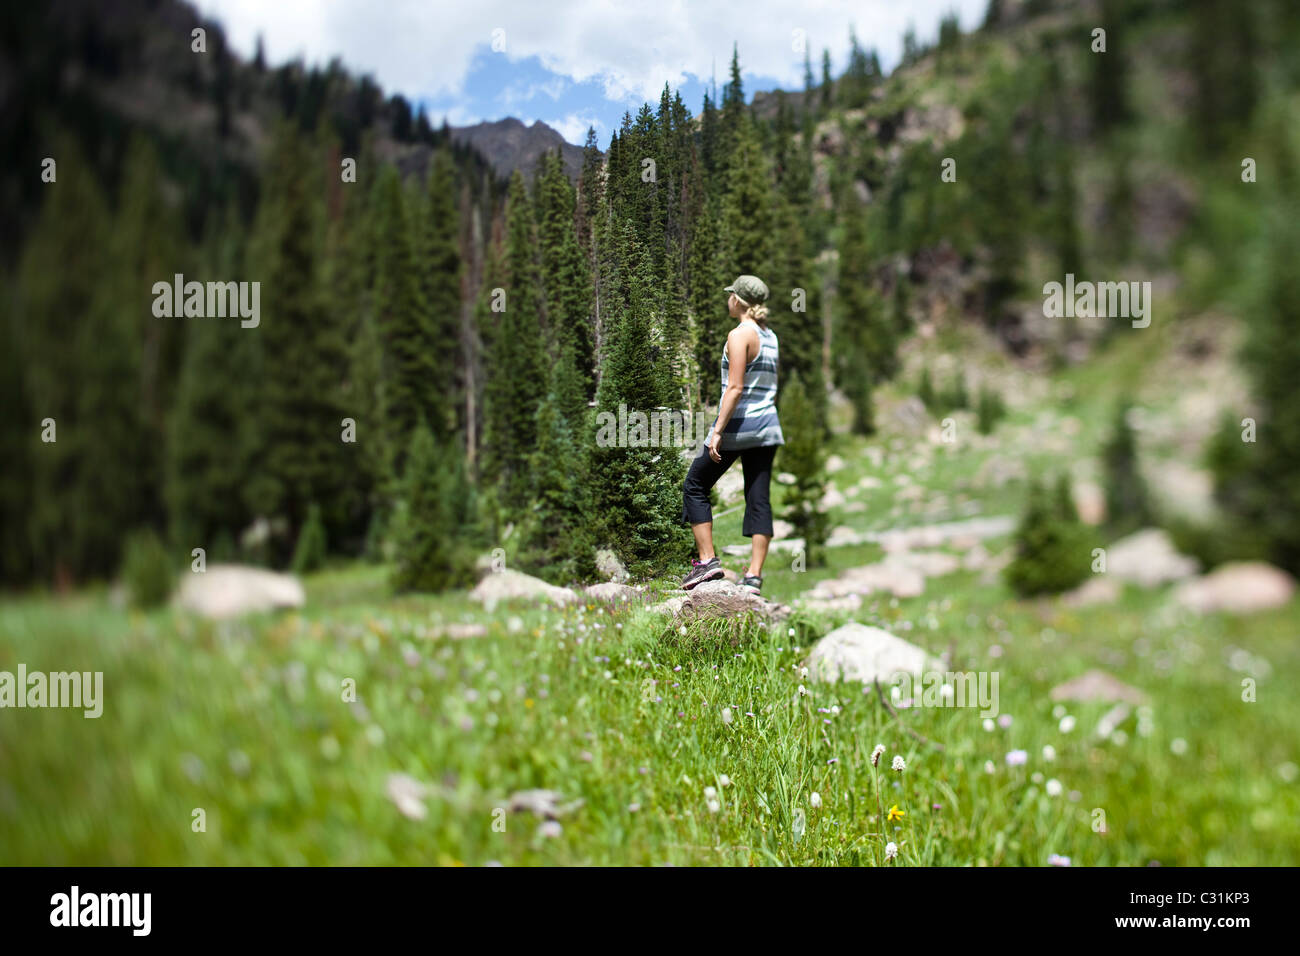 A young woman stands in a field of wildflowers taking in the view. Stock Photo